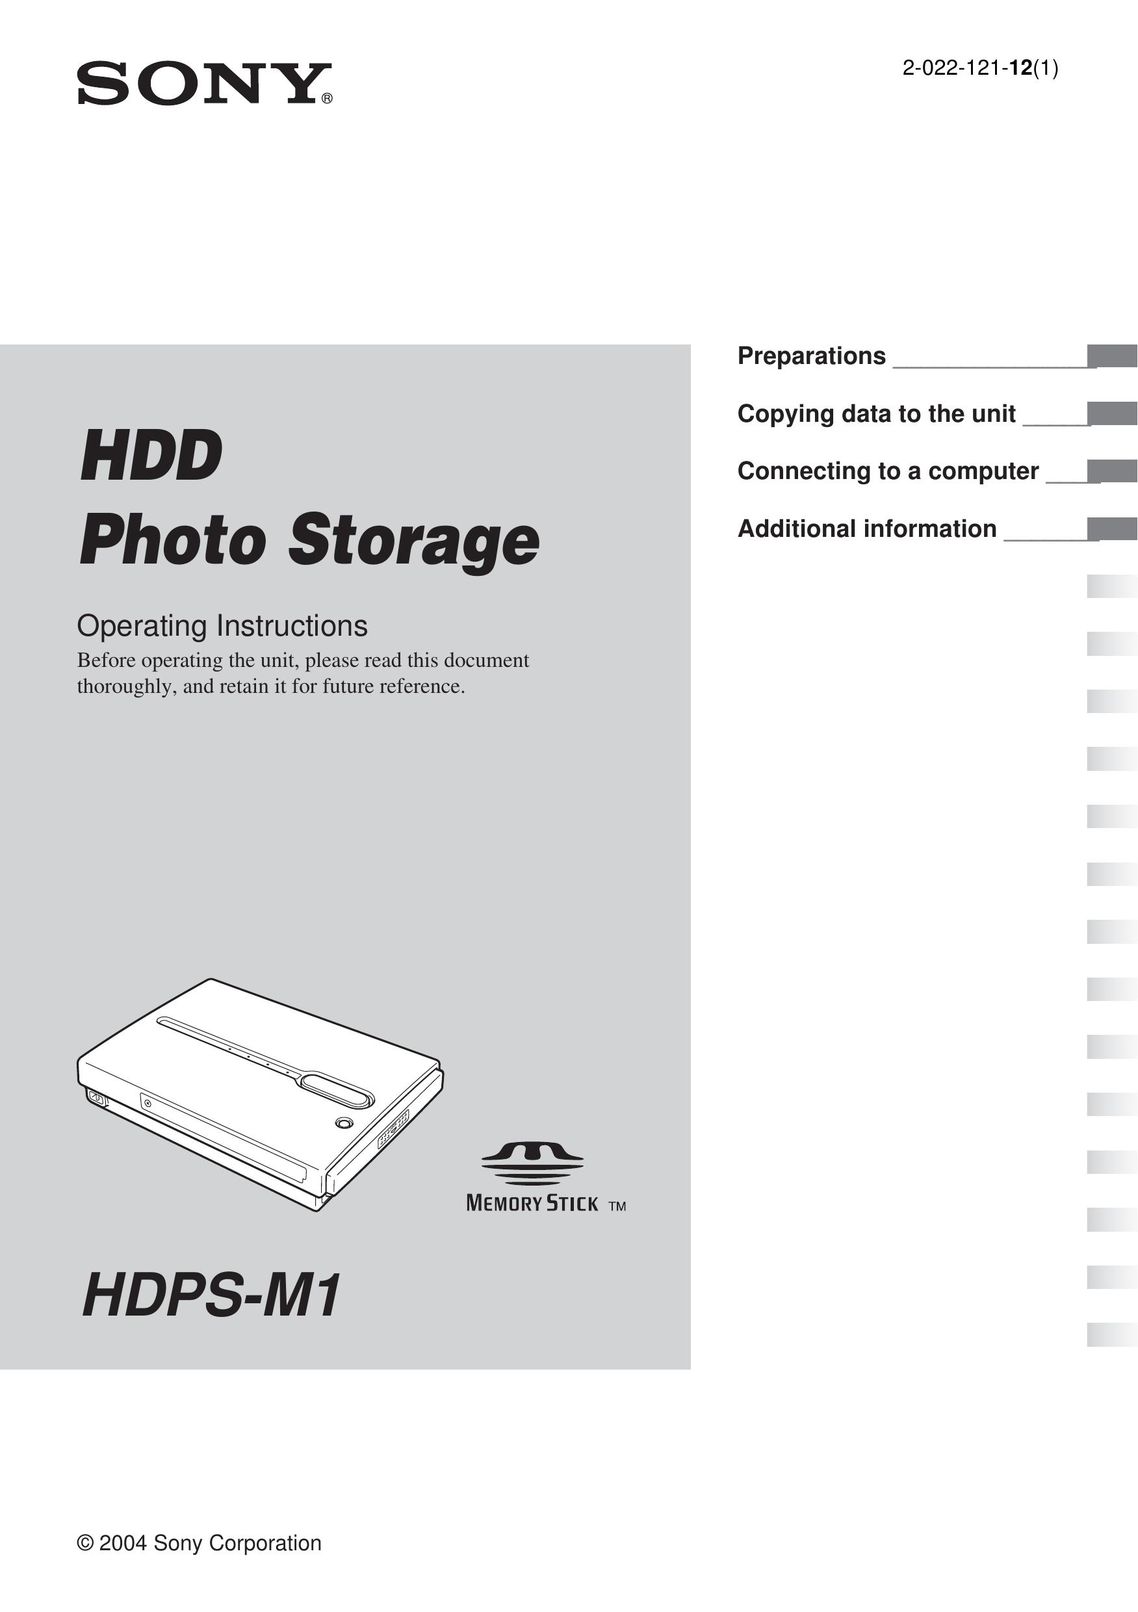 Sony HDPS-M1 Computer Drive User Manual